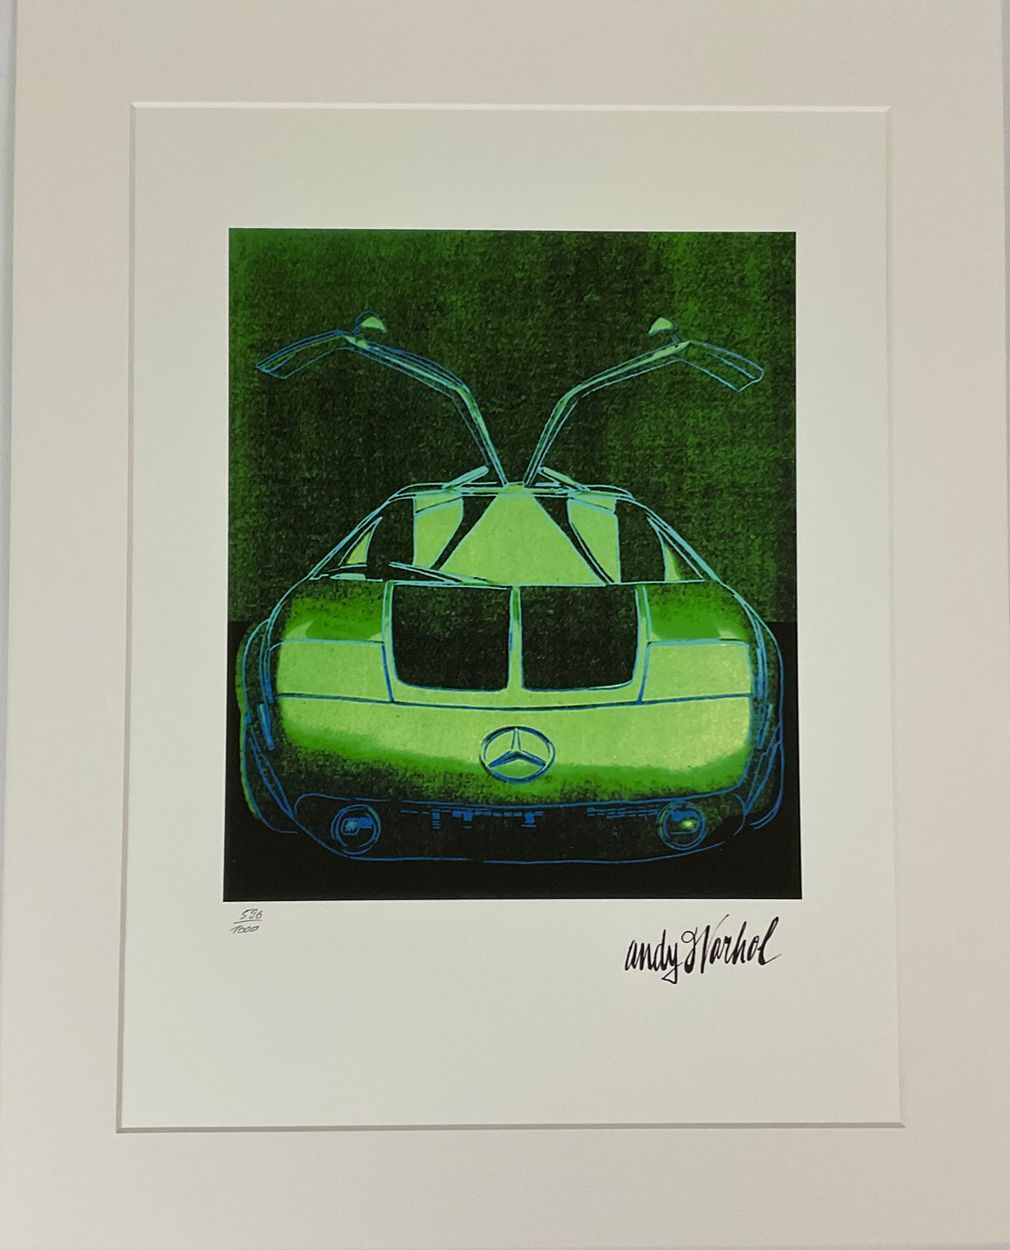 Andy Warhol Andy WARHOL (after)

"Mercedes C111 Green and Black "

Lithograph si&hellip;